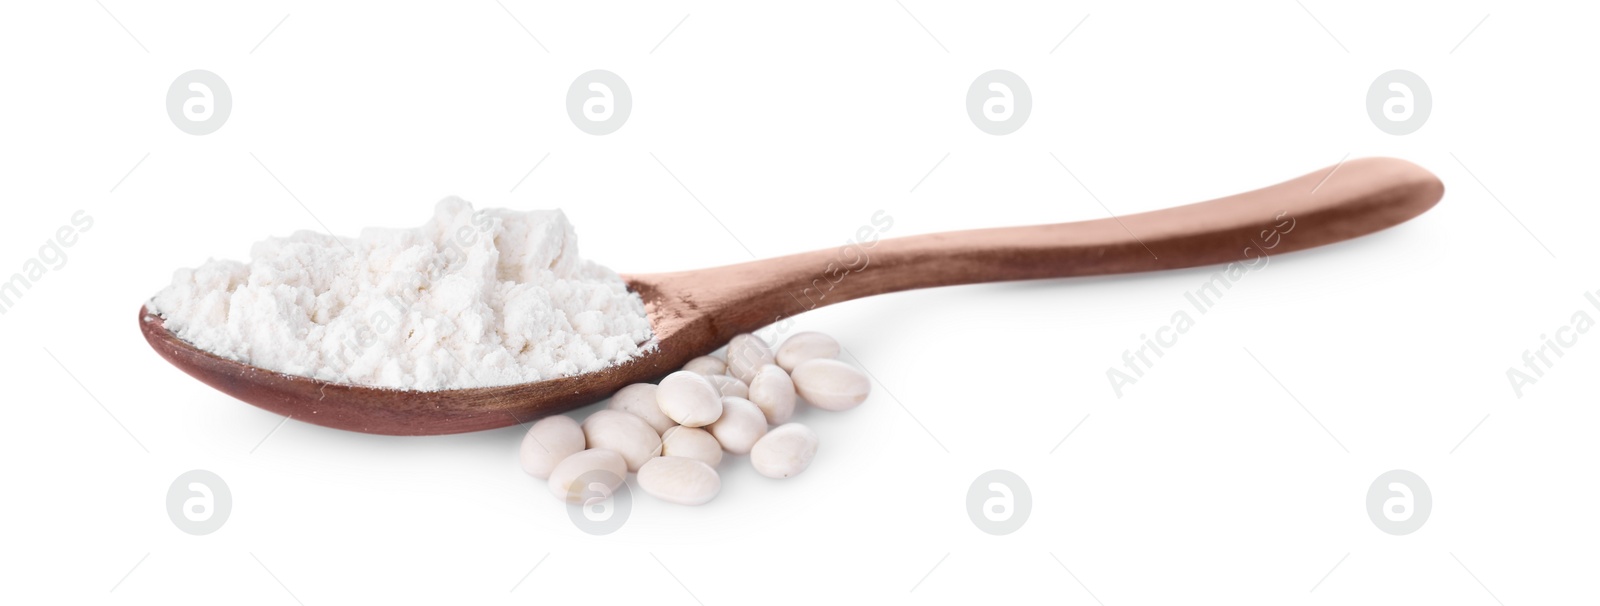 Photo of Wooden spoon with flour and kidney beans isolated on white